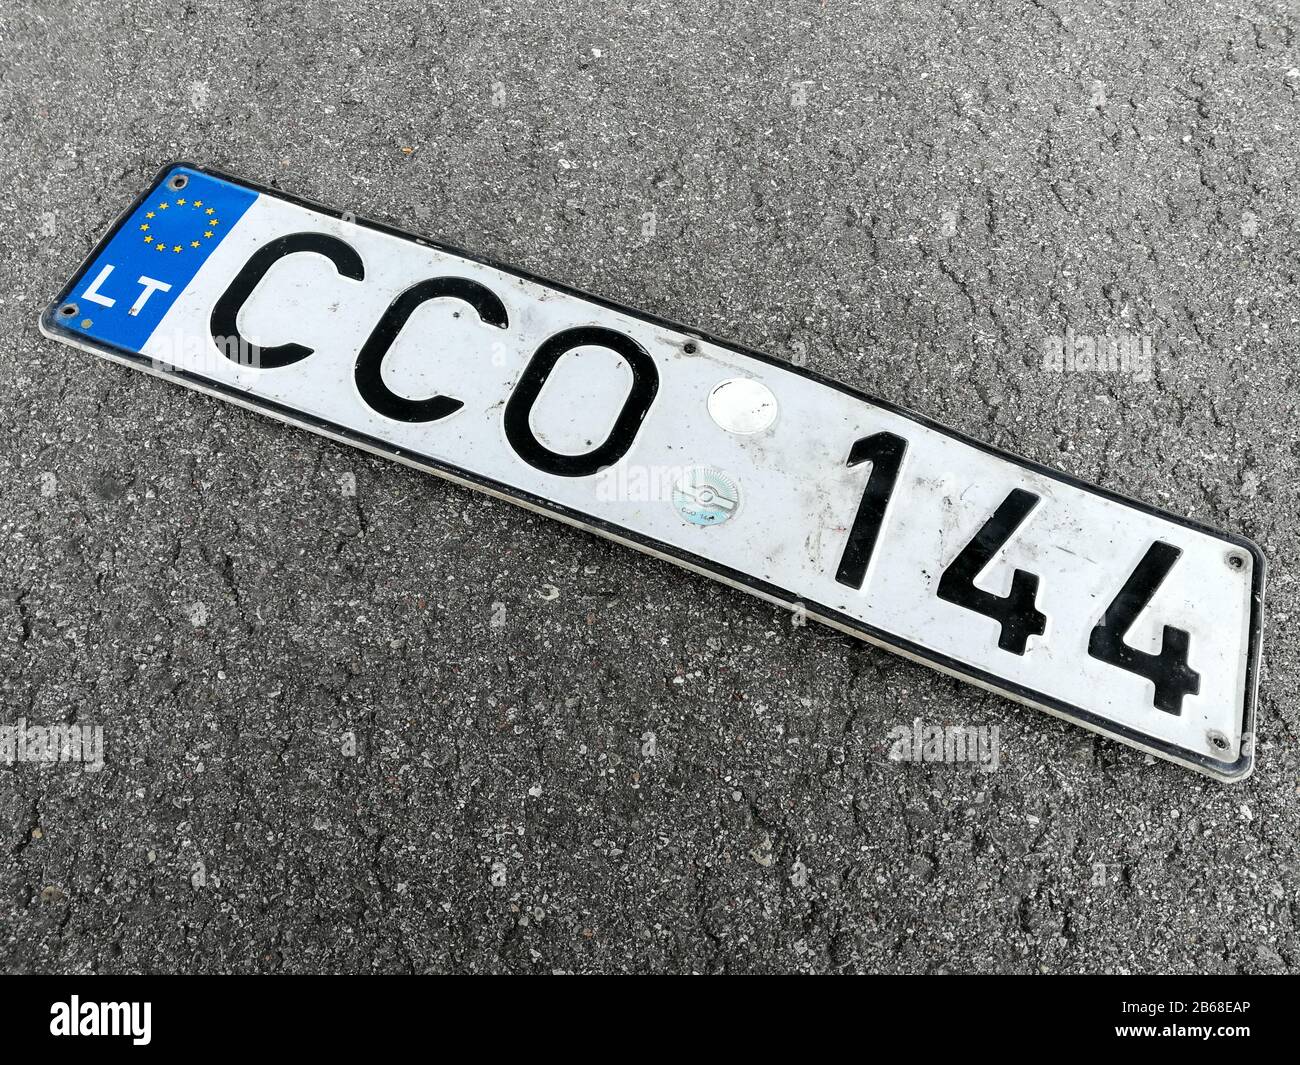 Obsolete lithuanian vehicle registration numbers on the street asphalt Stock Photo